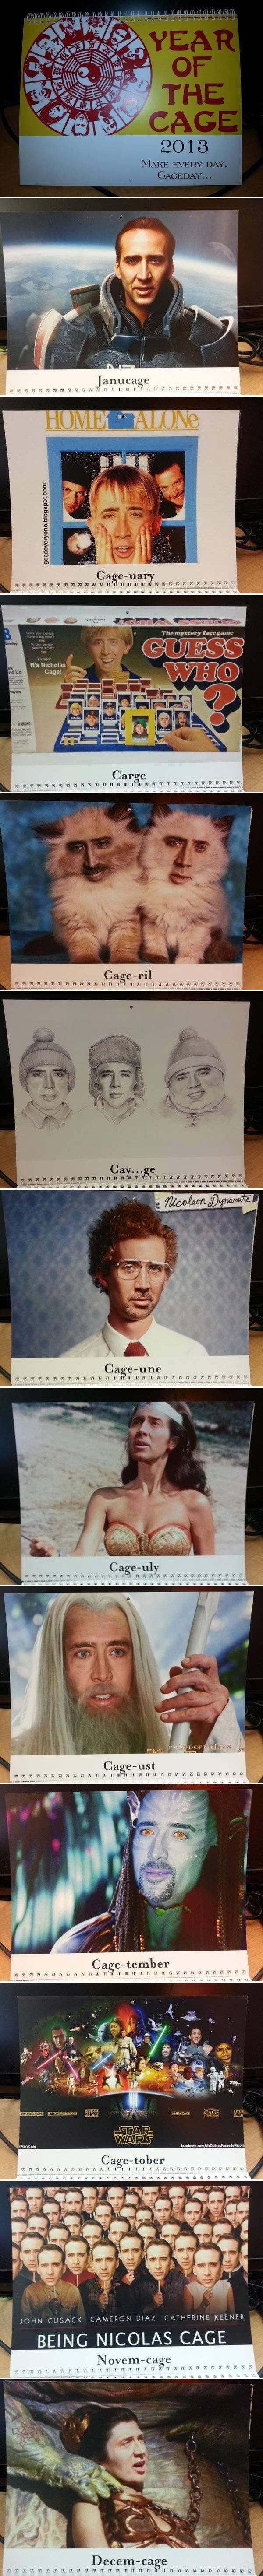 Cage year